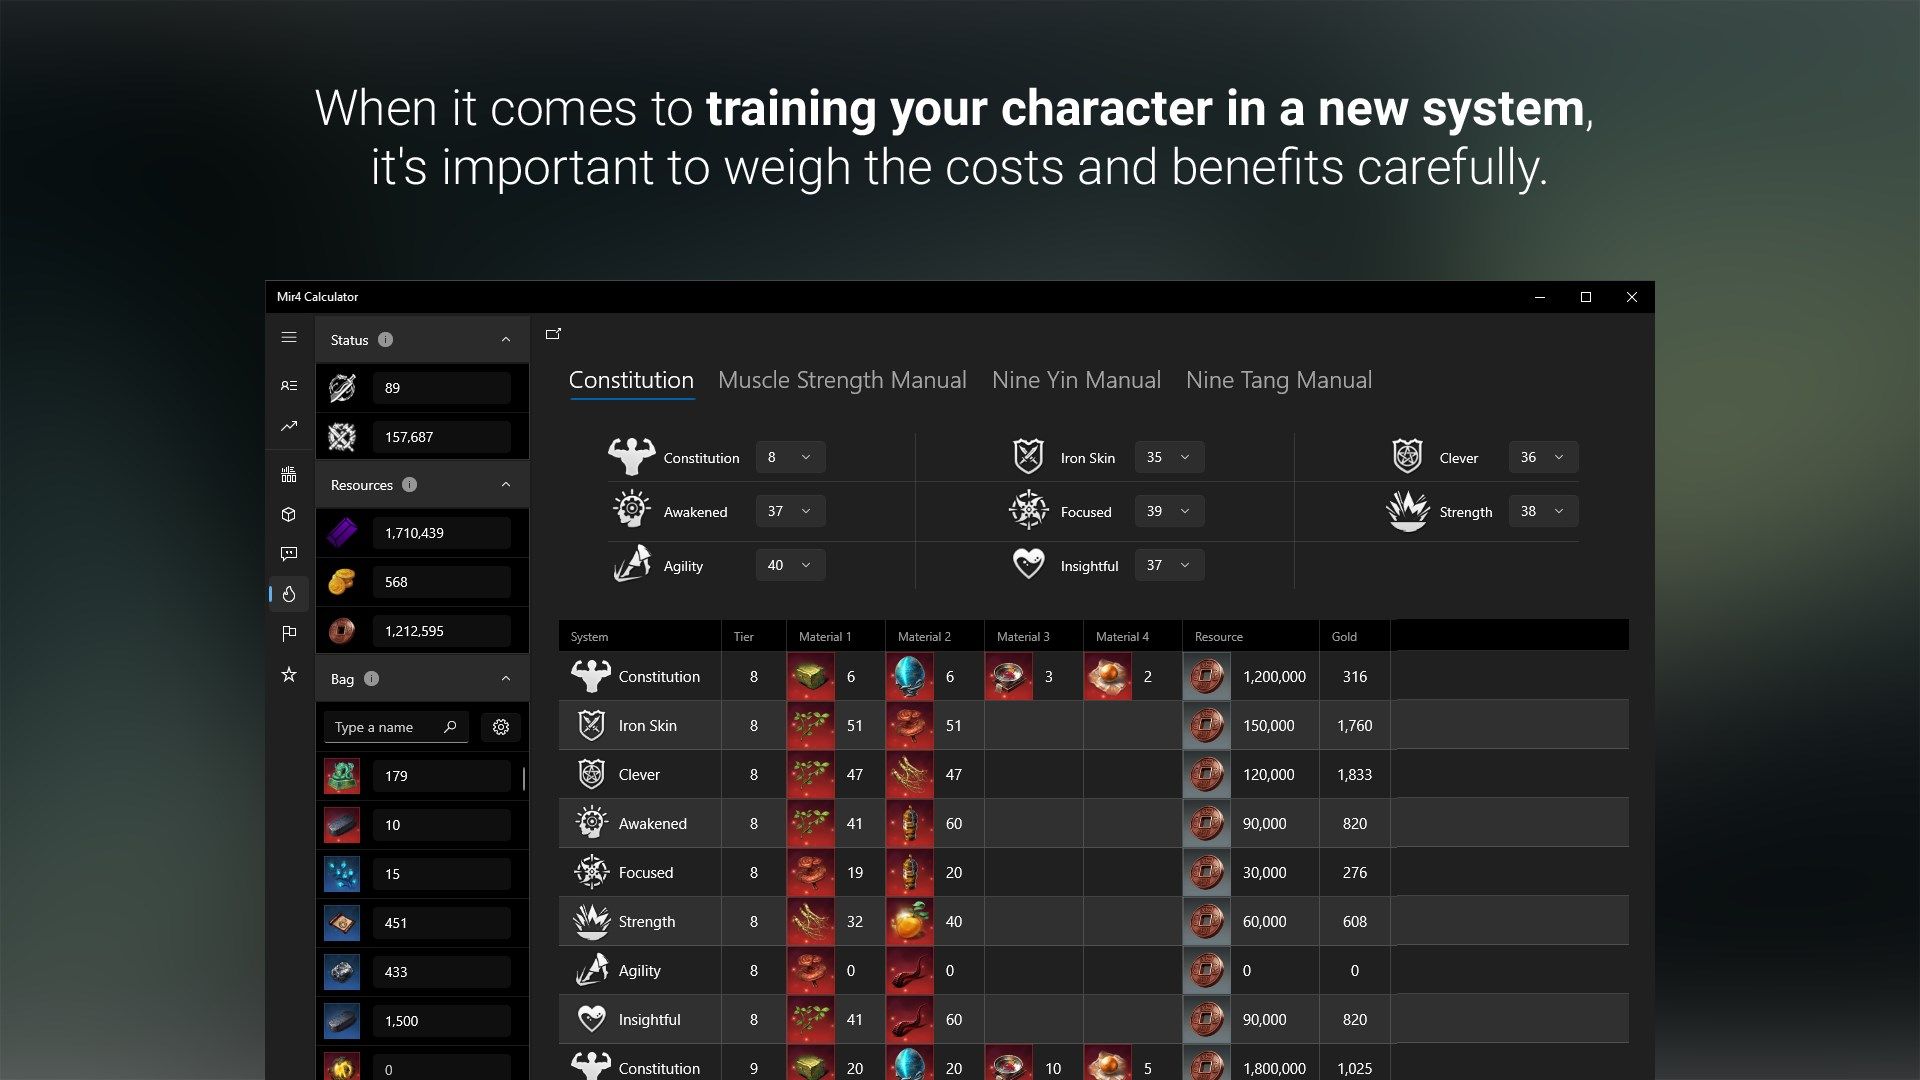 Mir4 Calculator | When it comes to training your character in a new system, it's important to weigh the costs and benefits carefully.